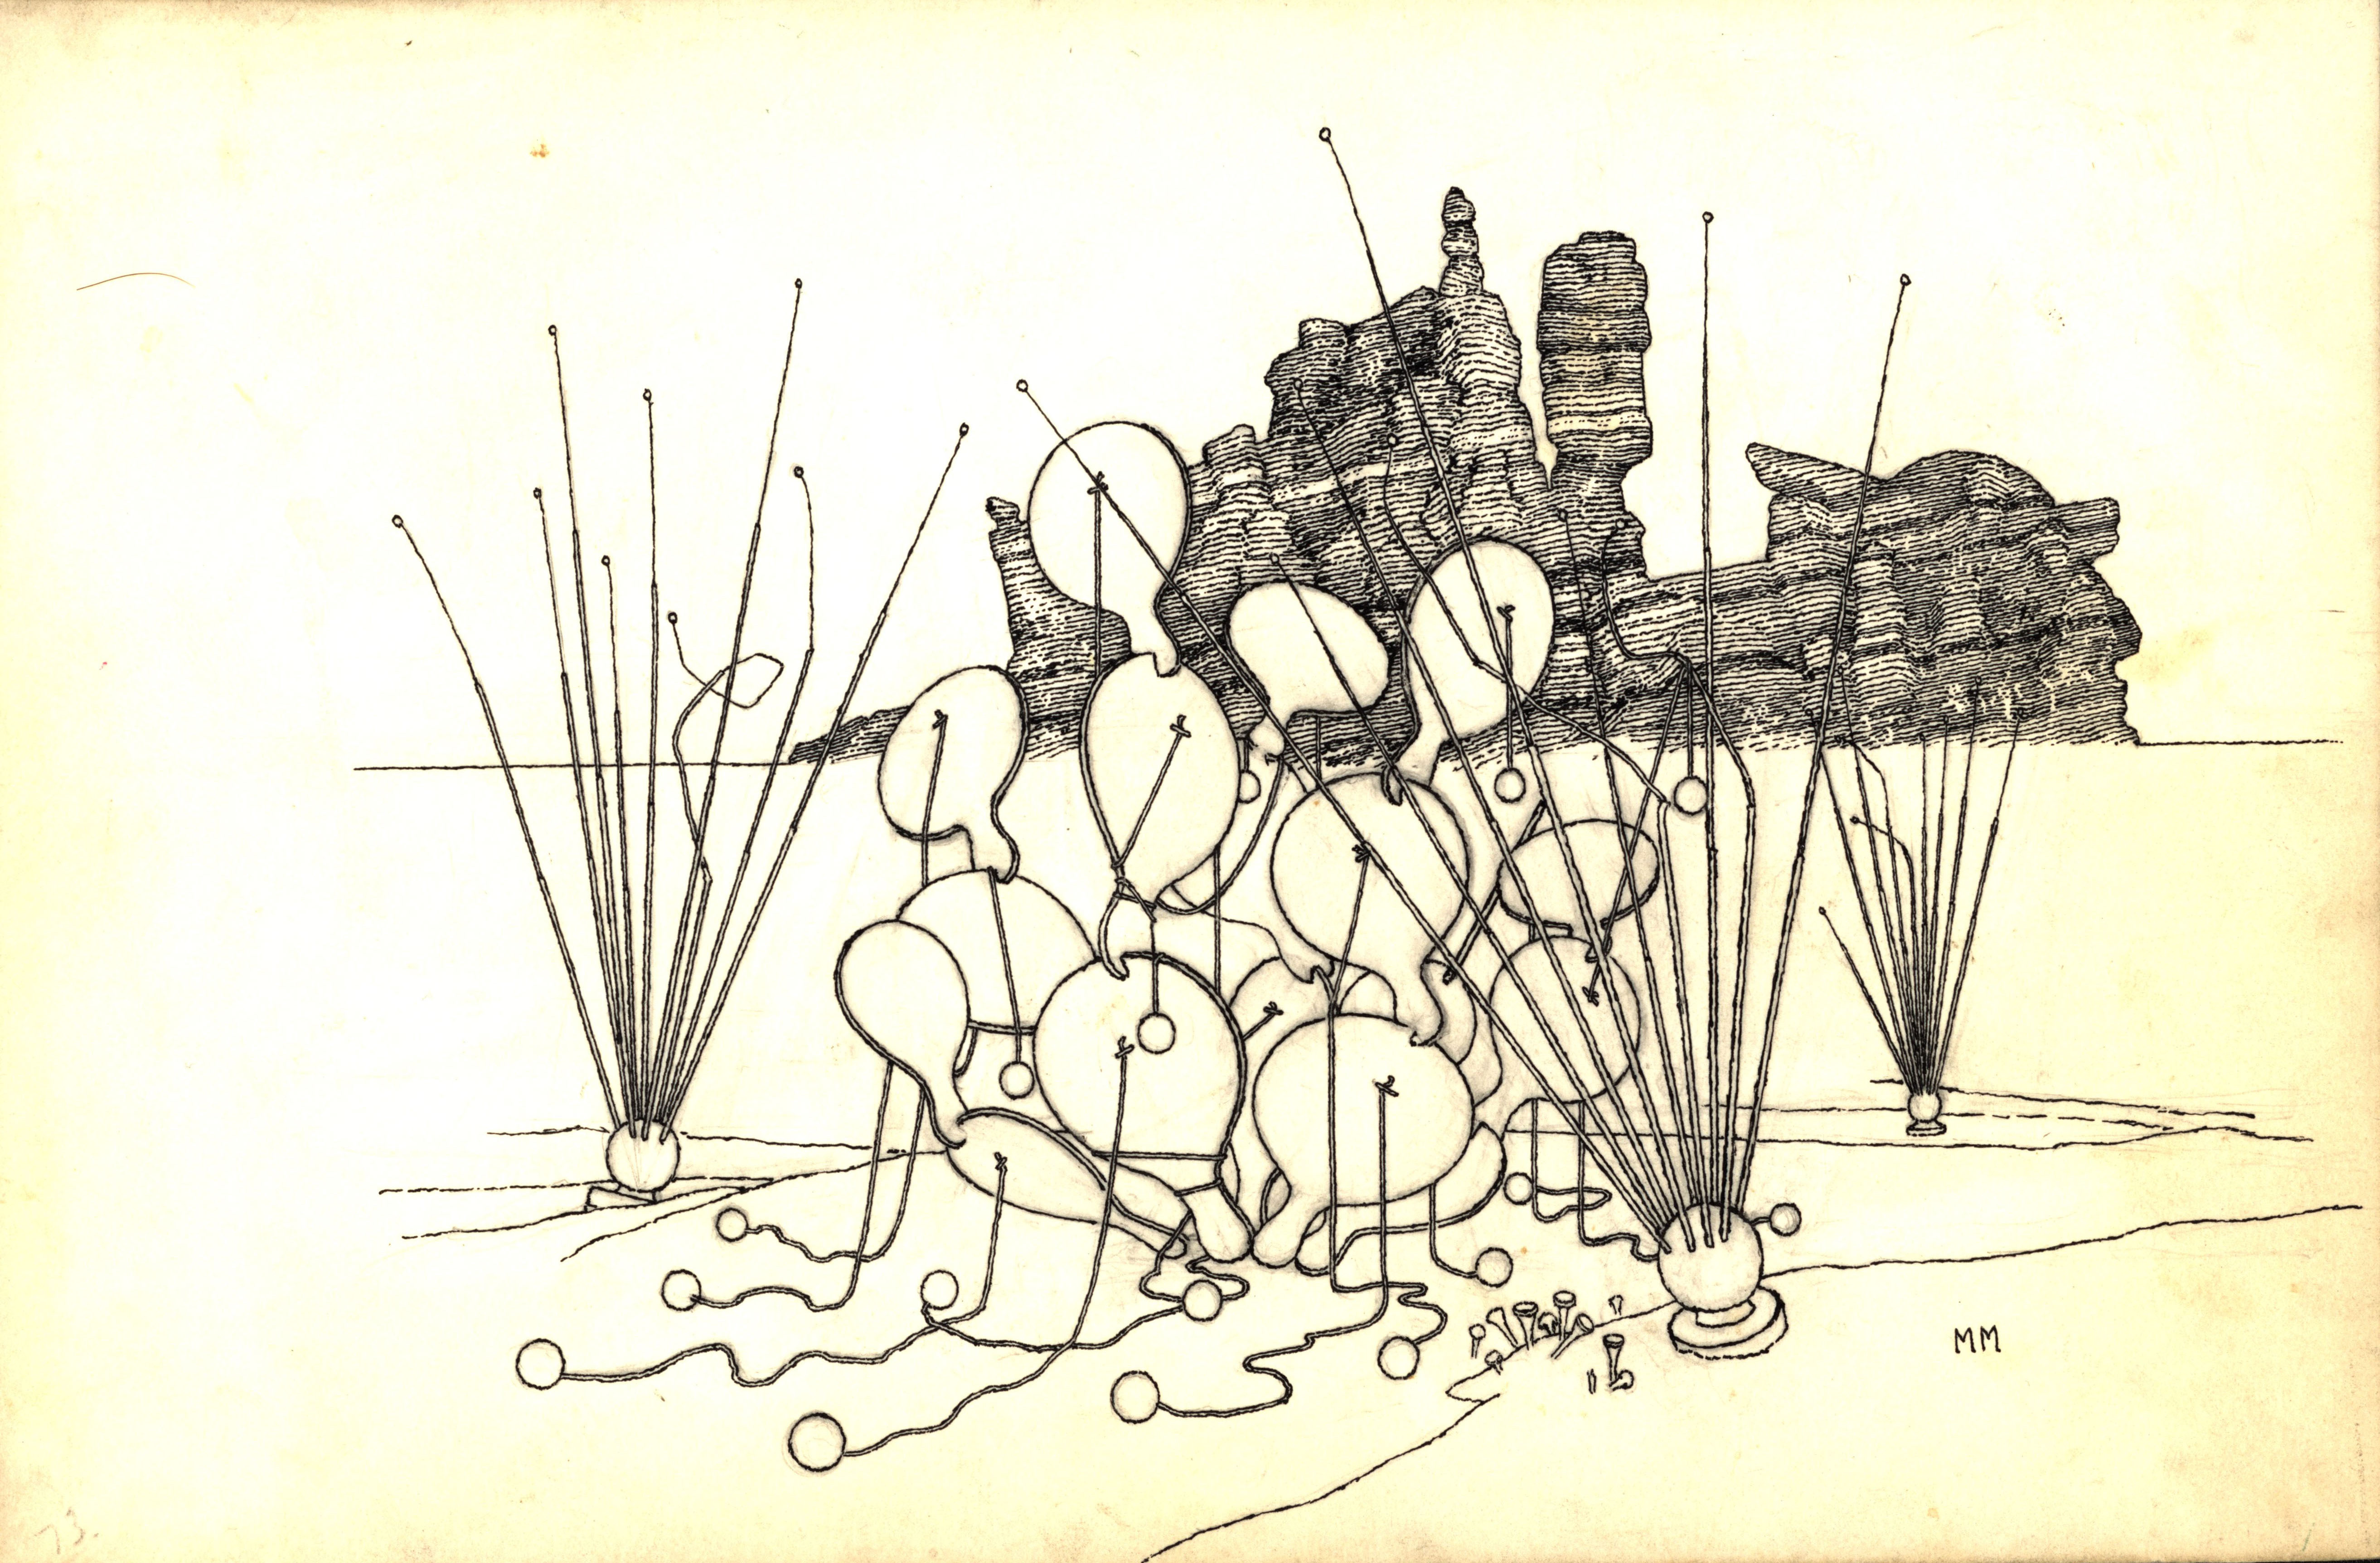 Meyers, Michael. “Opuntia ellisiana” (Spineless prickly pear cactus), original artwork for illustration accompanying “Fifteen Hundred Tons of Hay @ 1¢ per pound” in Recollections, ink on art board [1974], from the Zephyrus Image records